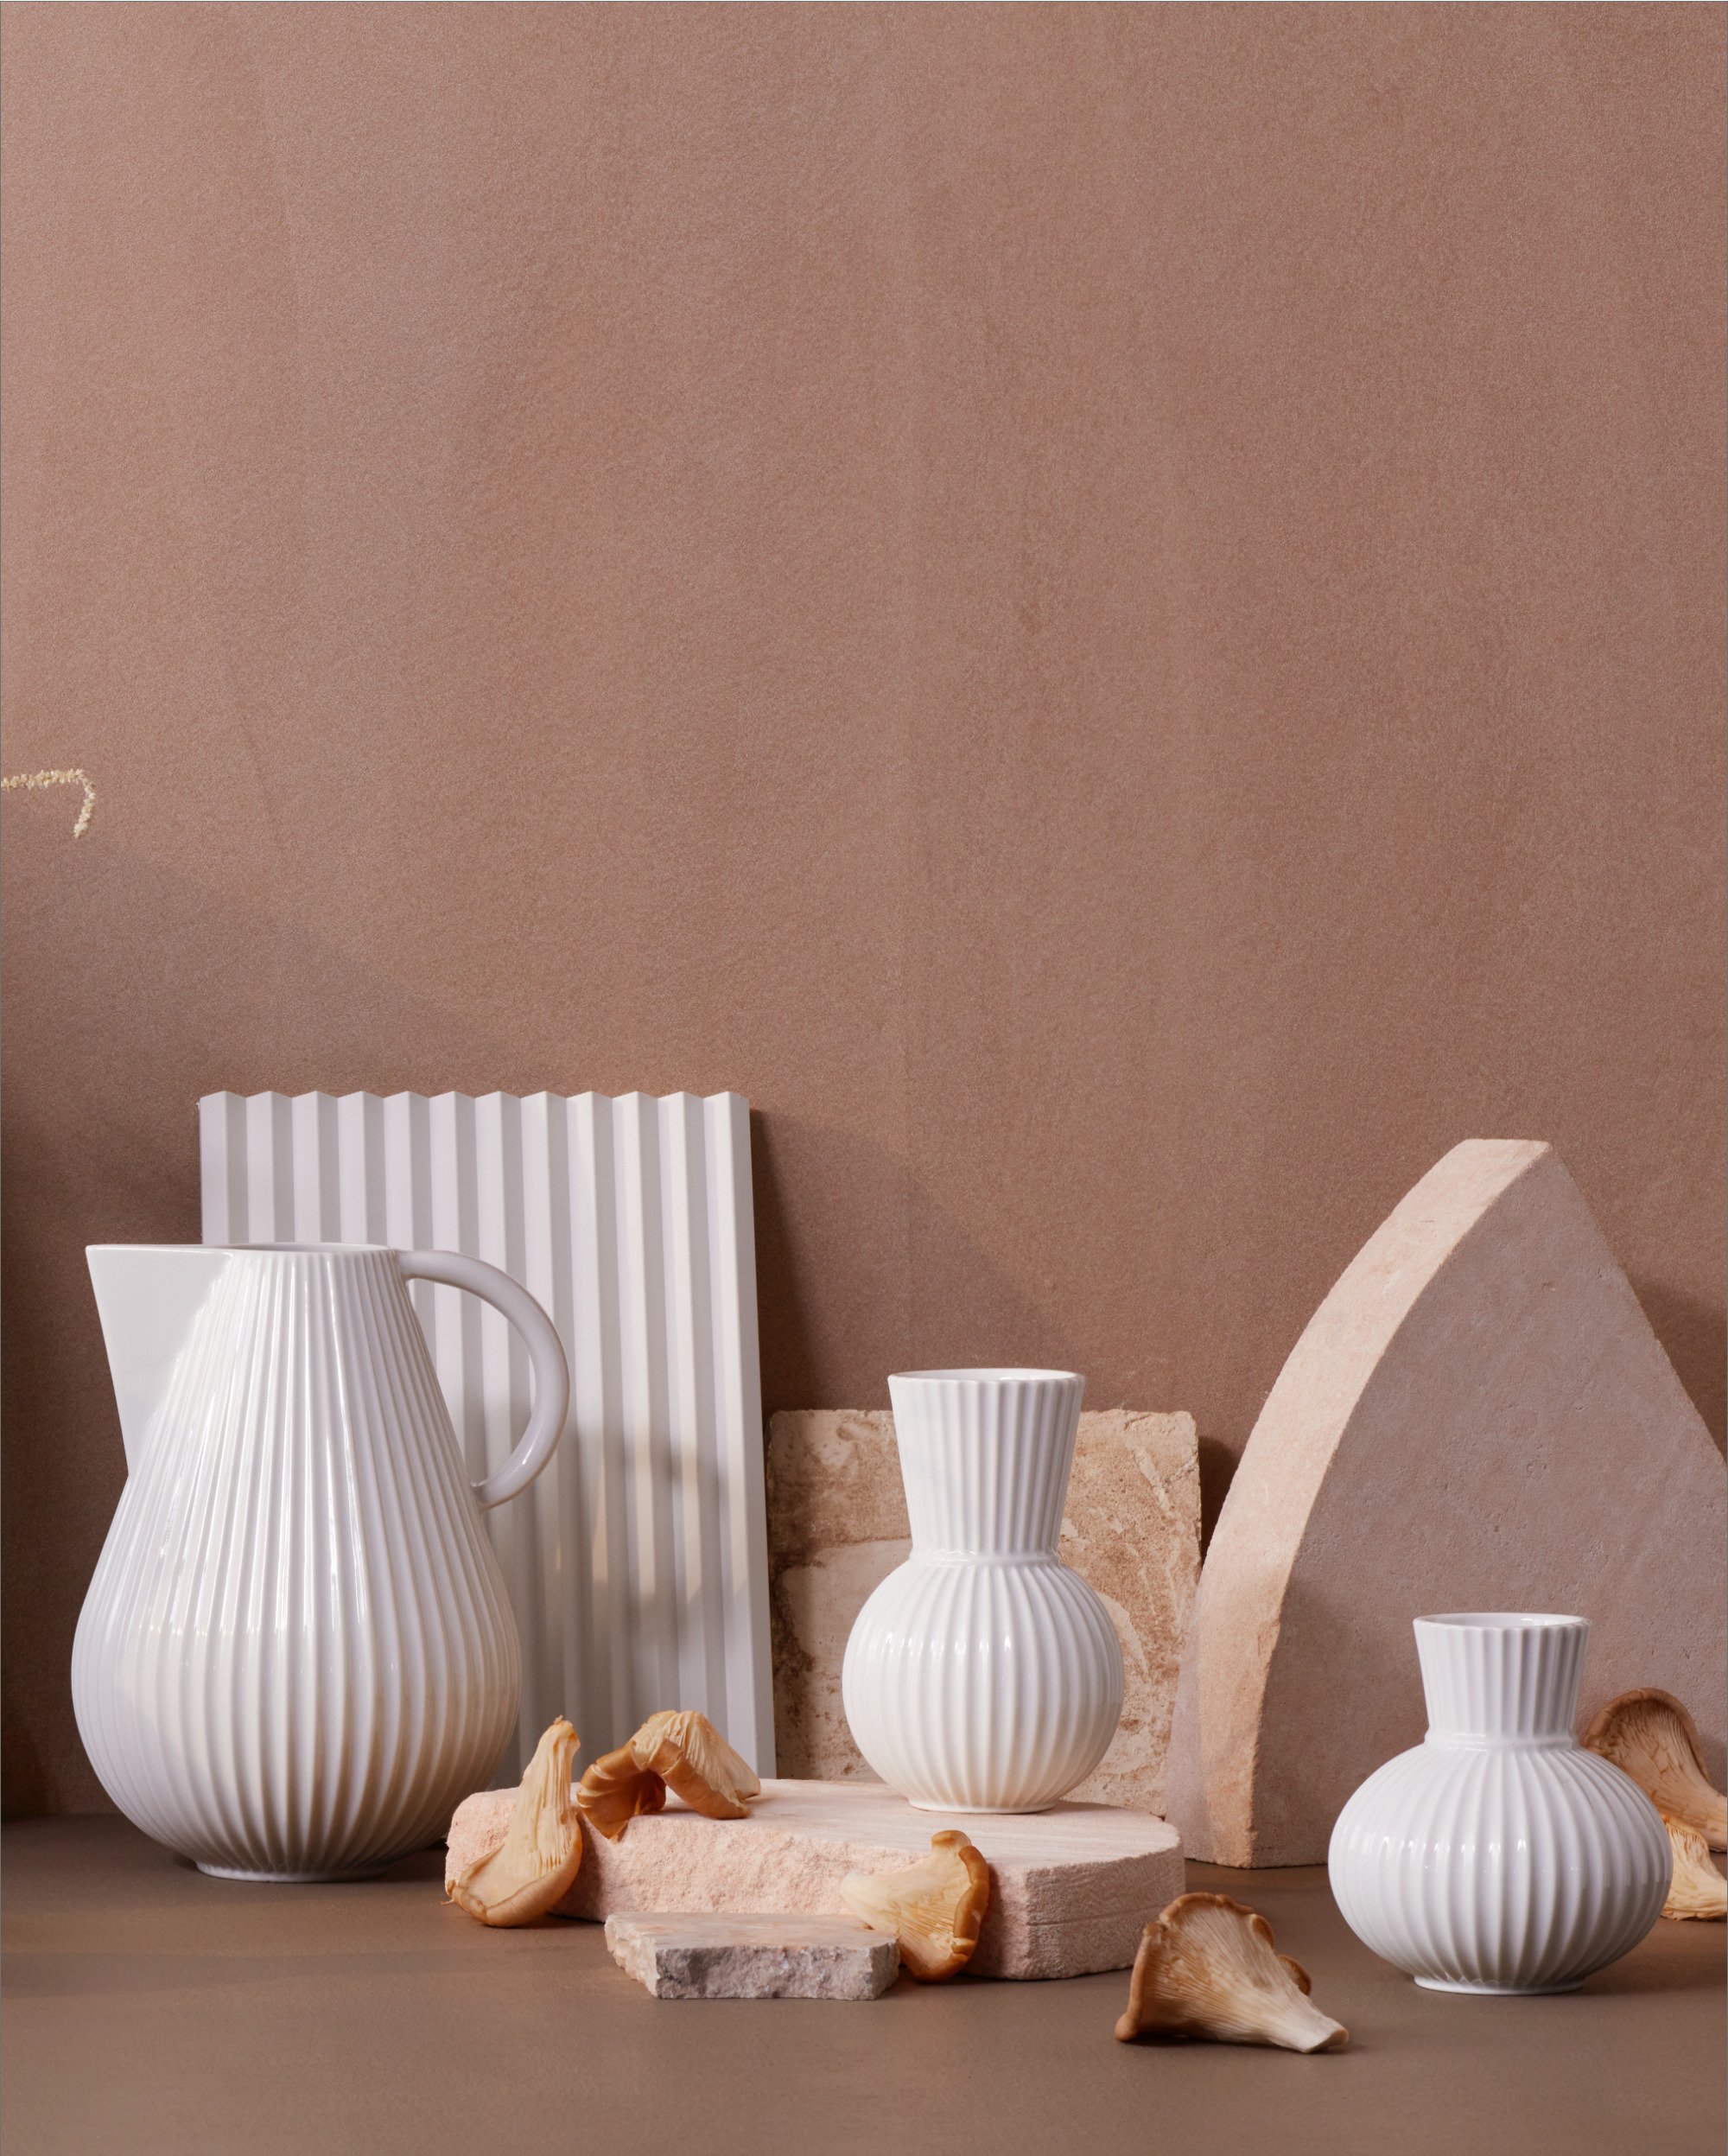 Lyngby porcelain delivery